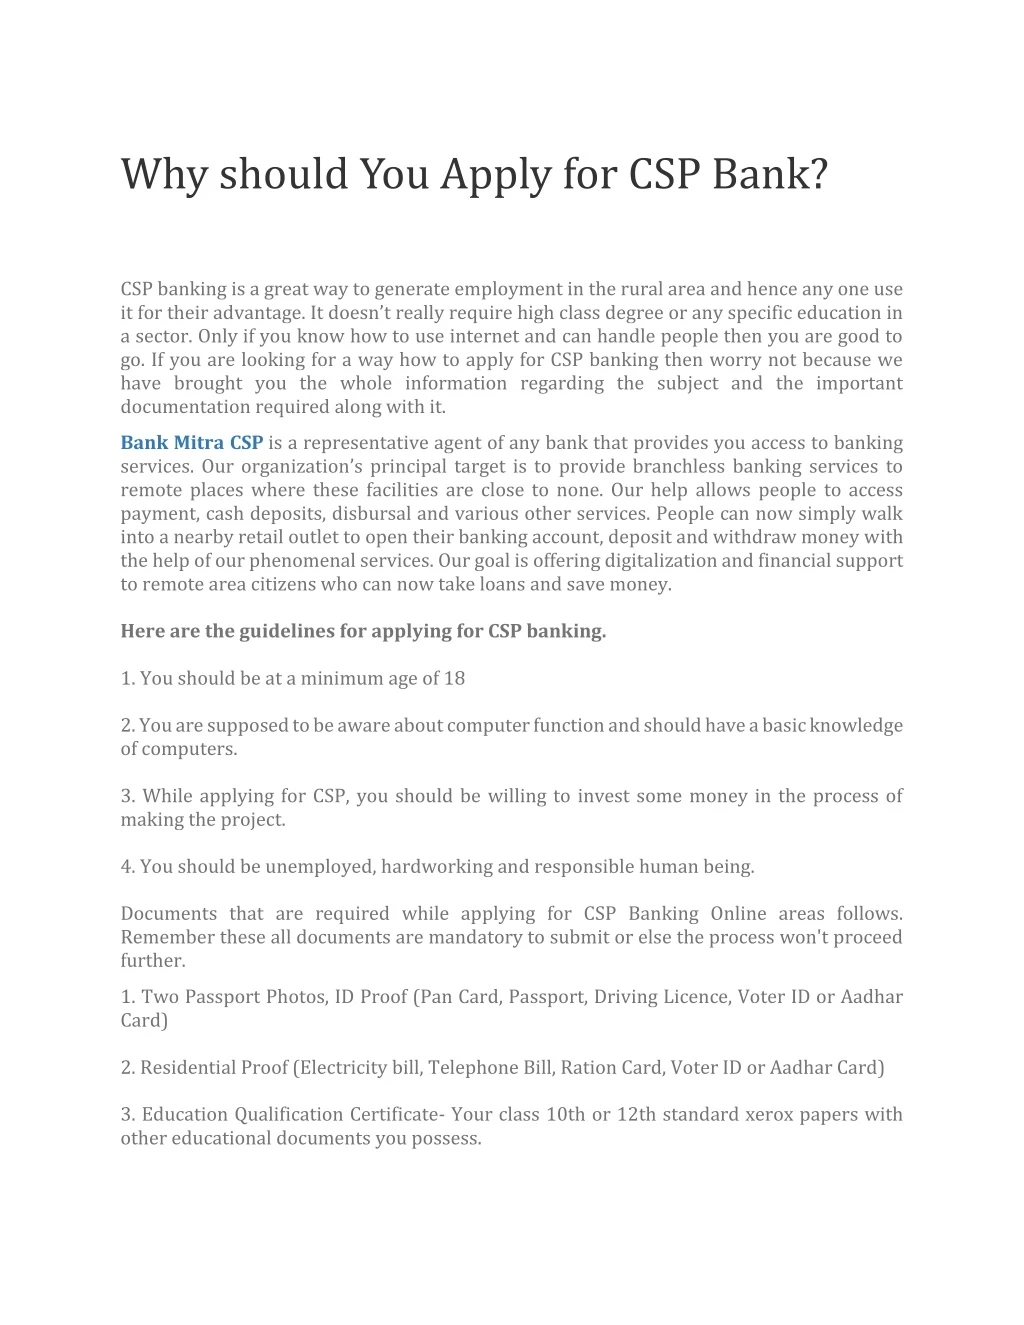 why should you apply for csp bank